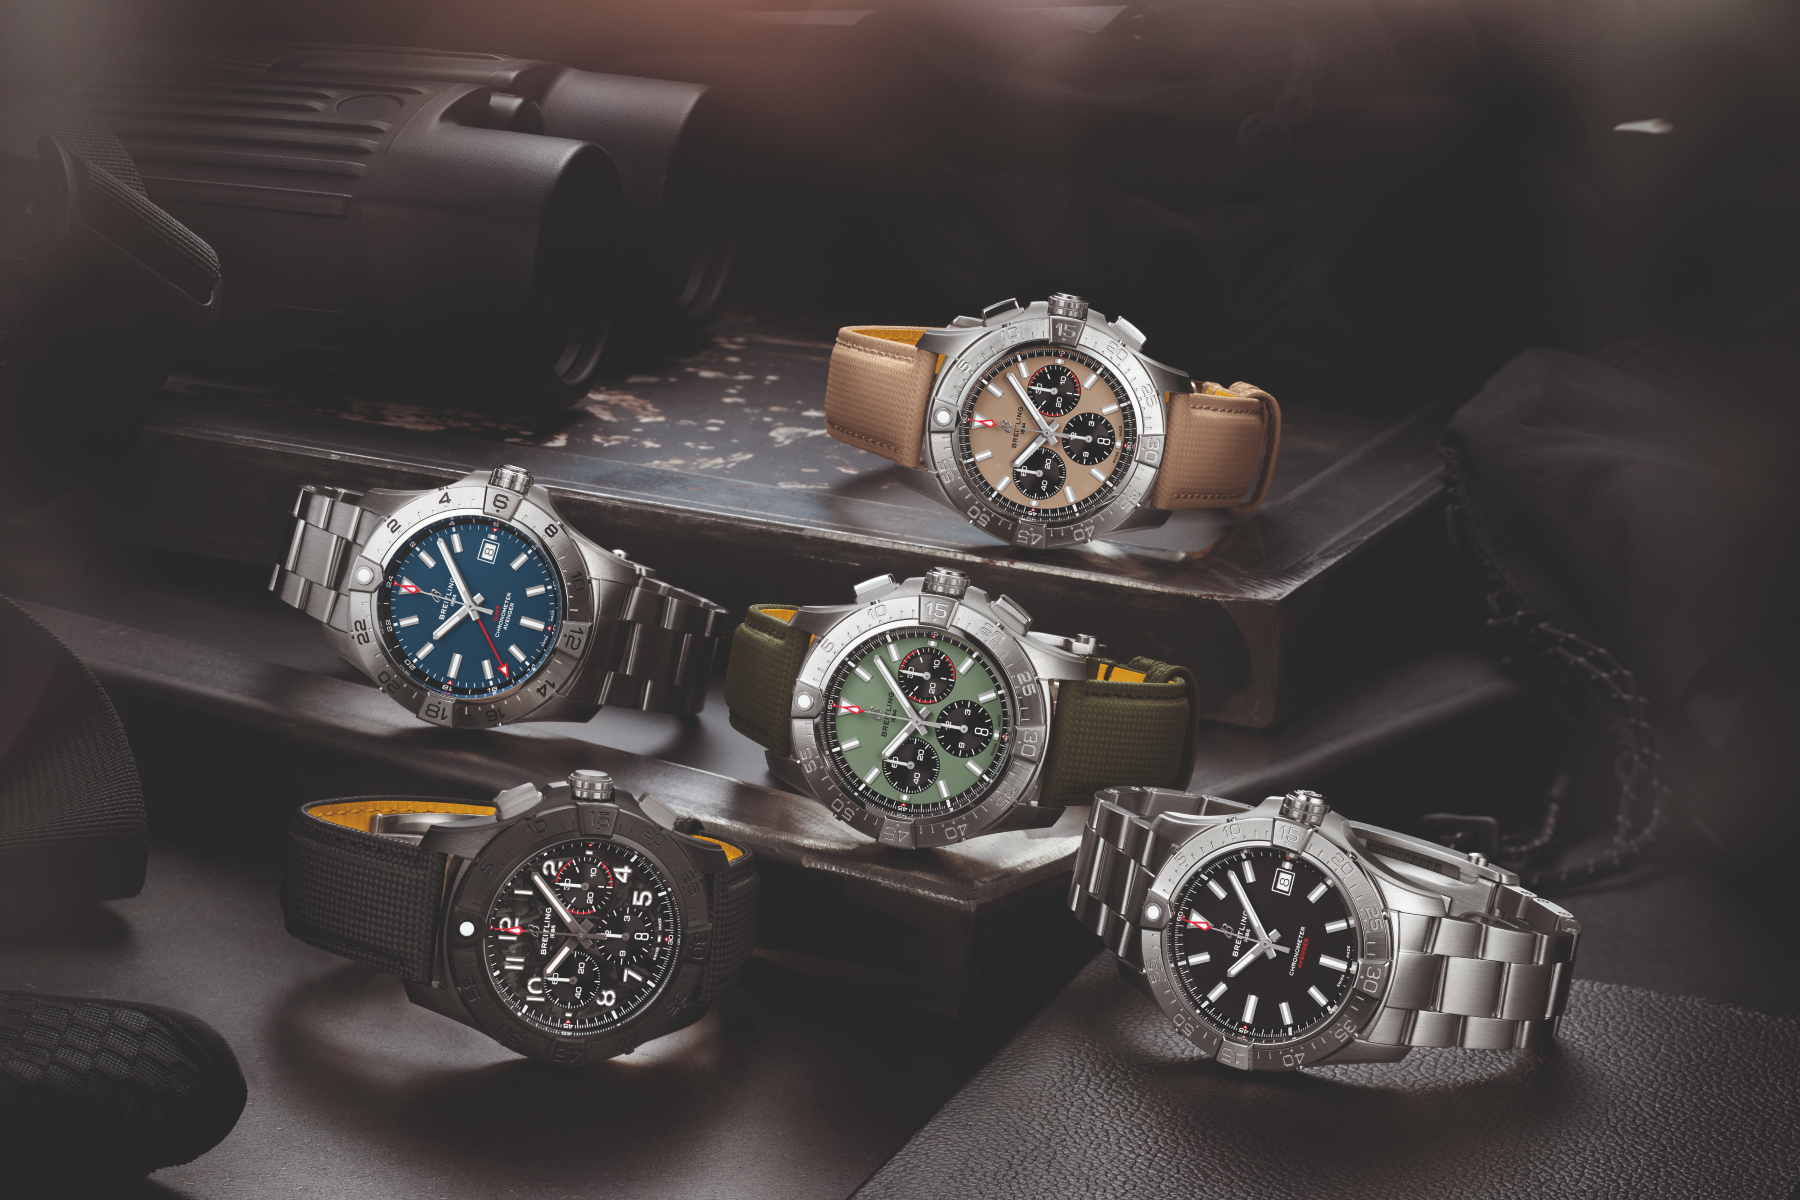 Breitling Avenger collection gets a complete redesign with sleek updates